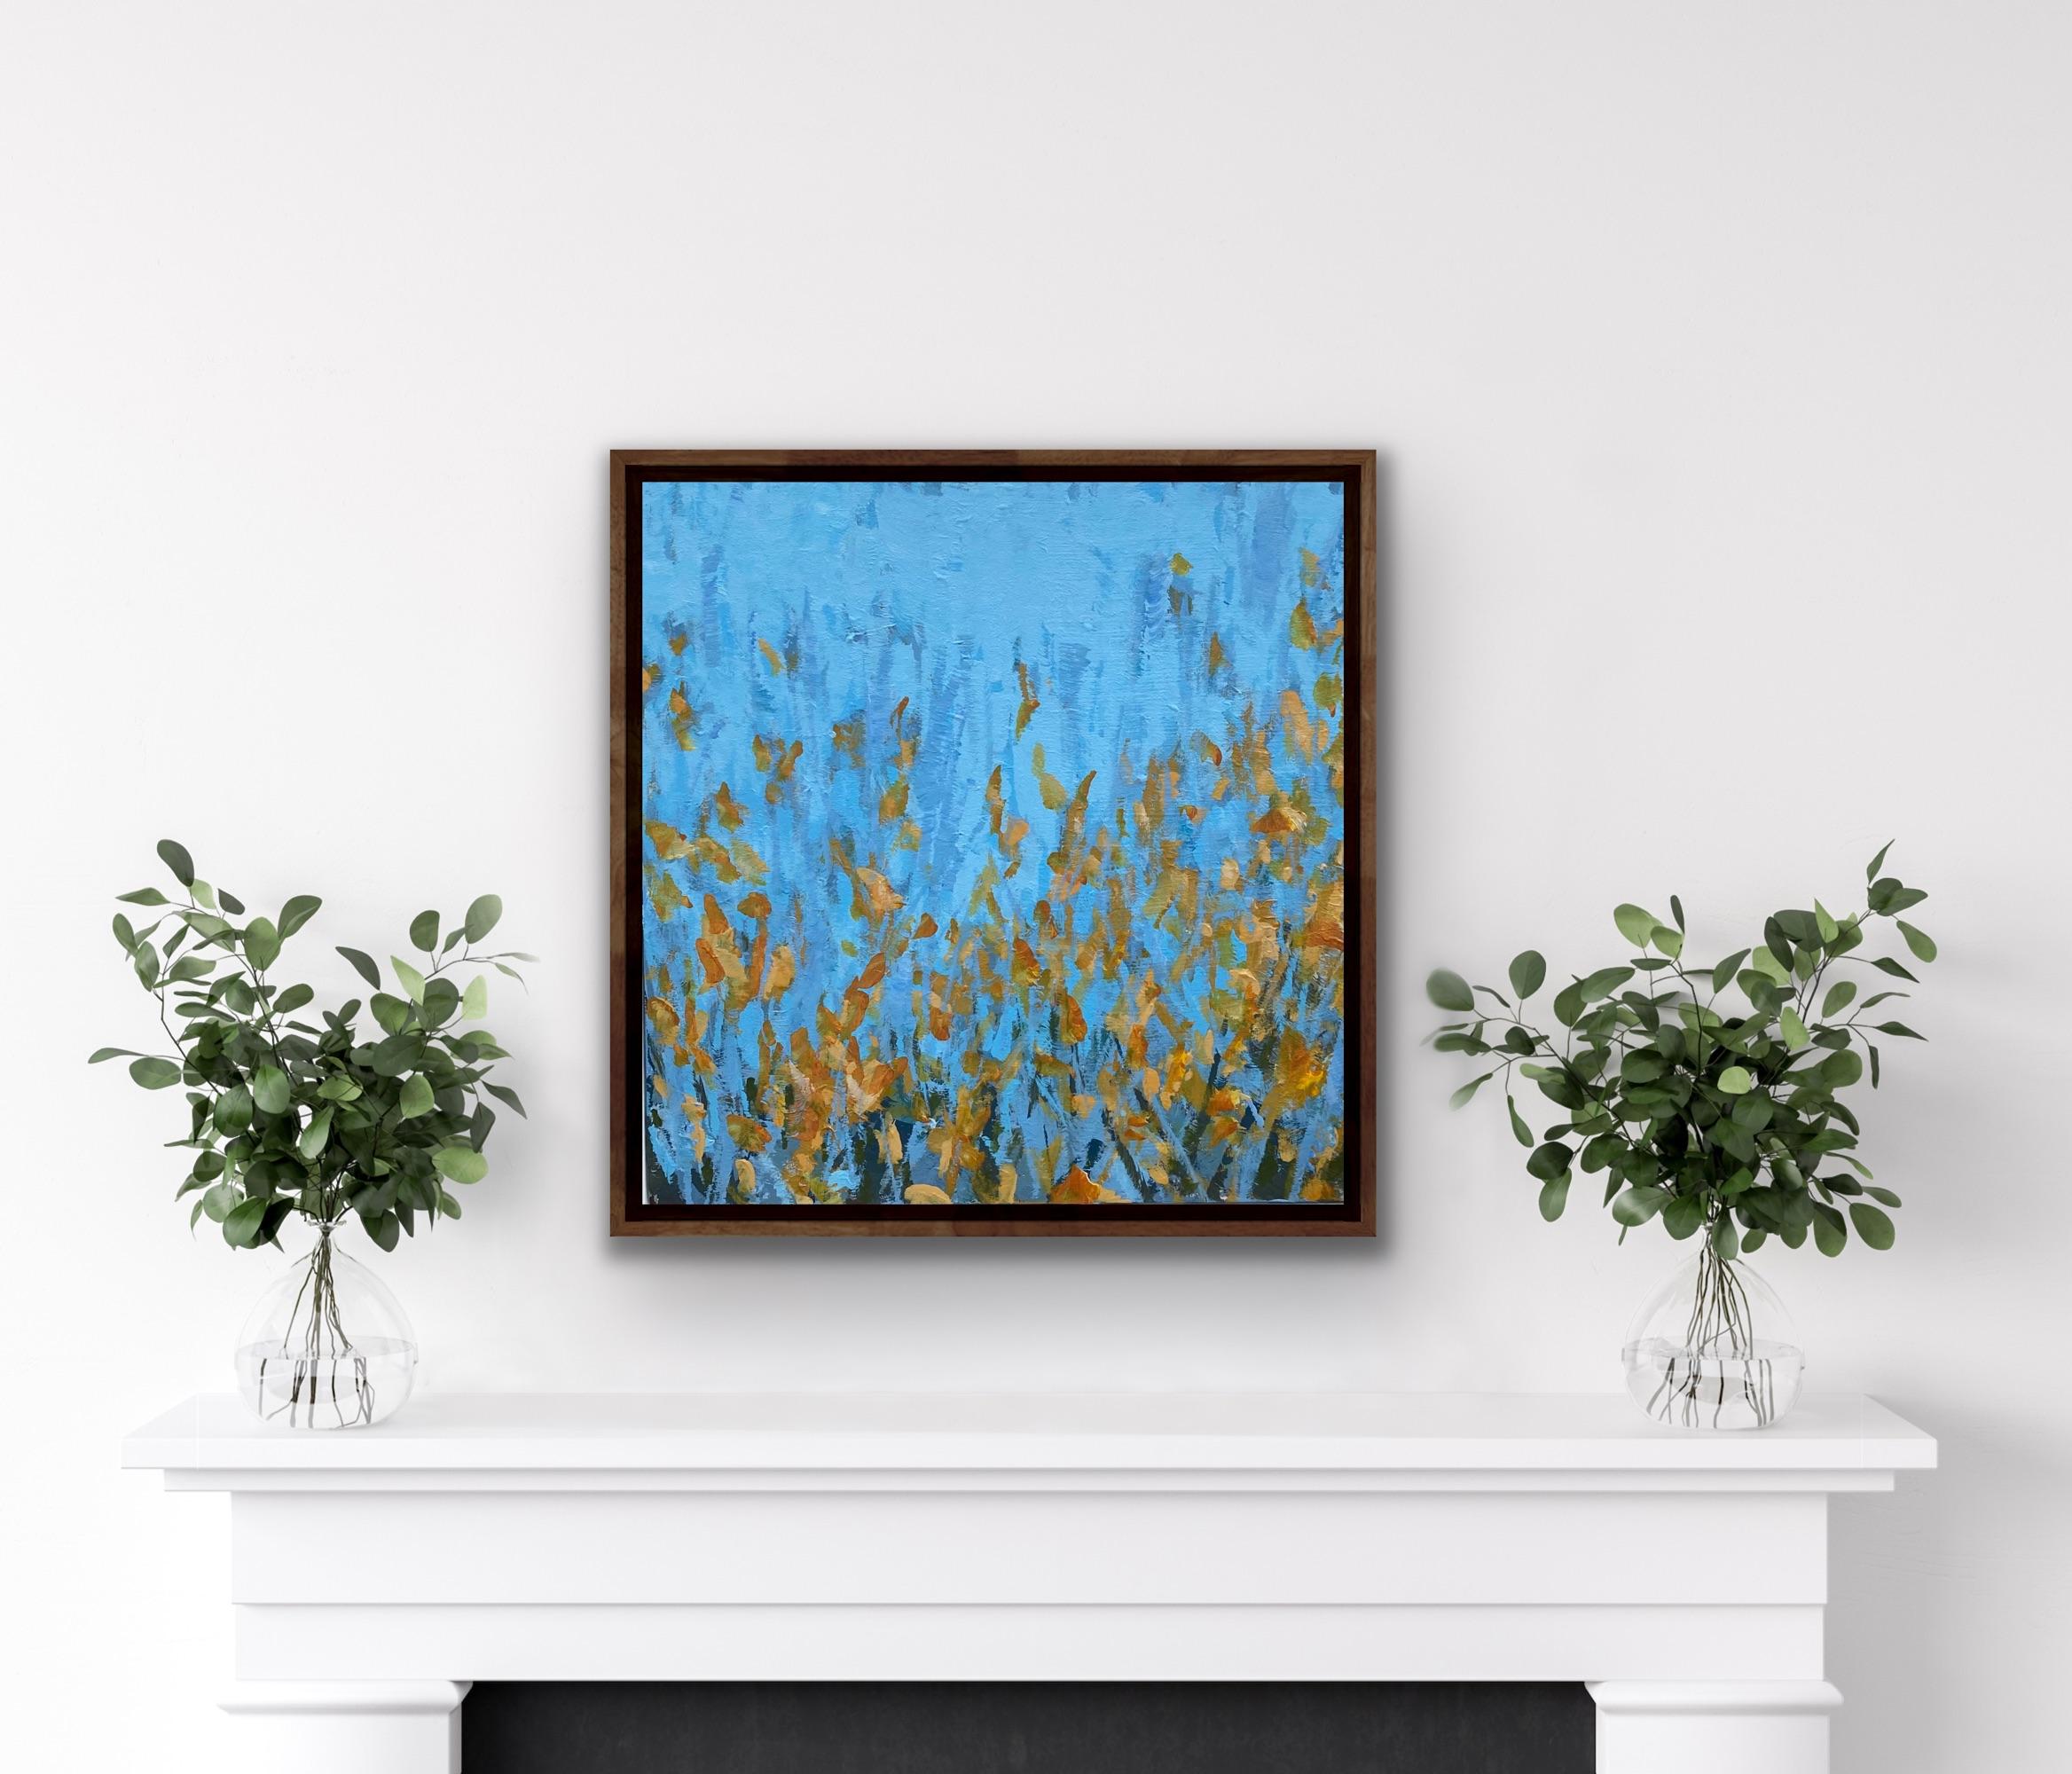 Gorse 3, Jo Cottam, Original painting, Abstract floral painting, Landscape art - Painting by Jo Cottam 